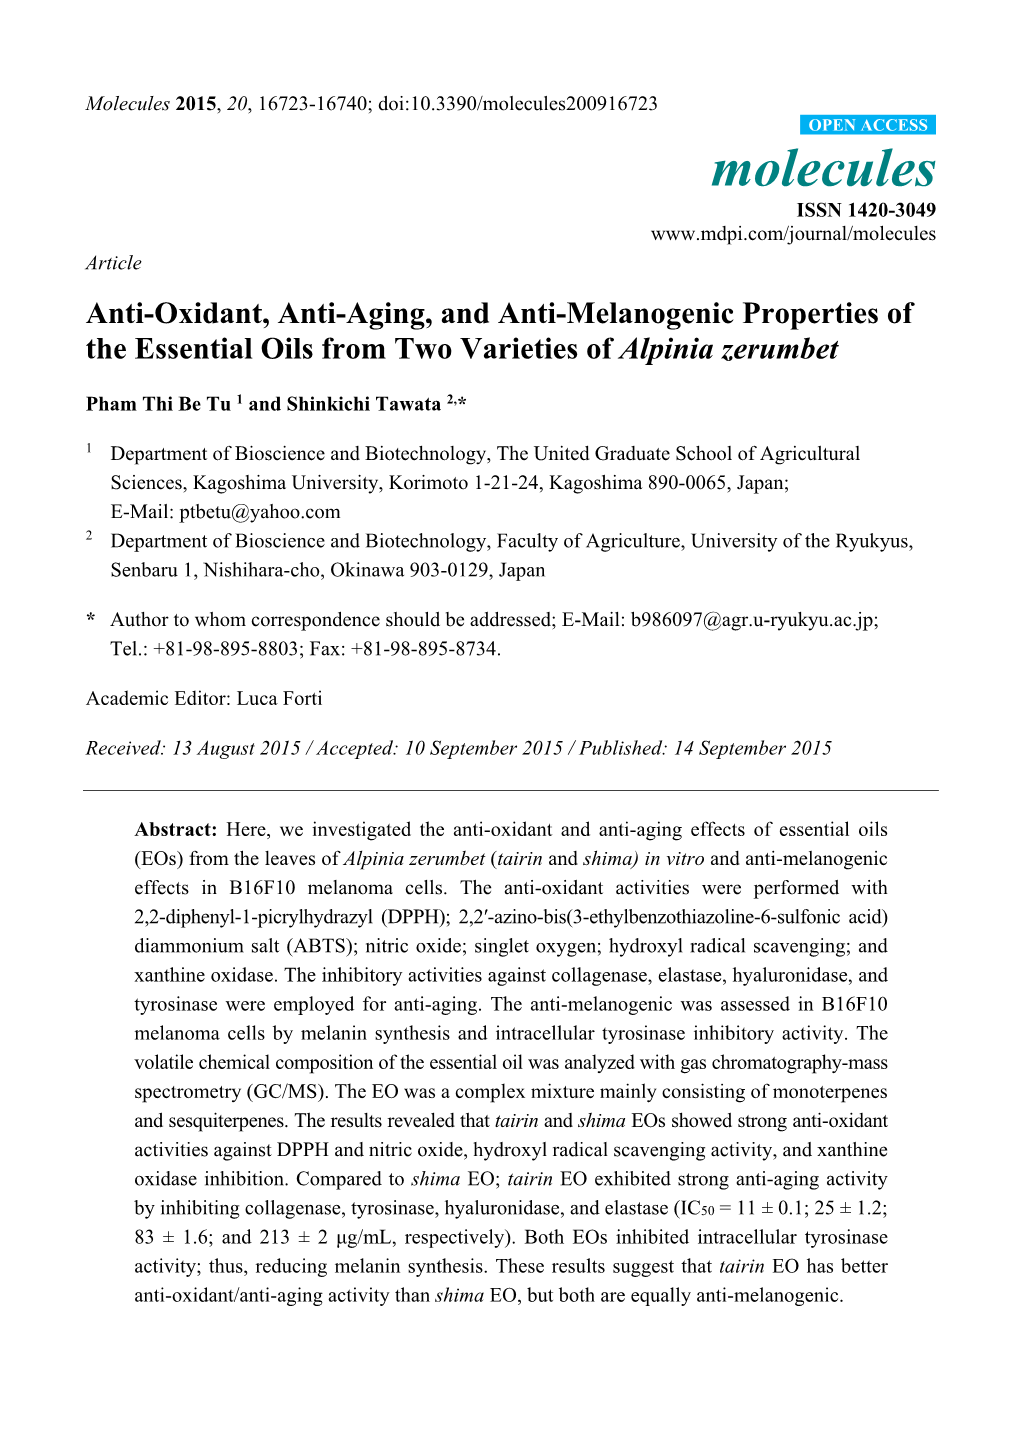 Anti-Oxidant, Anti-Aging, and Anti-Melanogenic Properties of the Essential Oils from Two Varieties of Alpinia Zerumbet